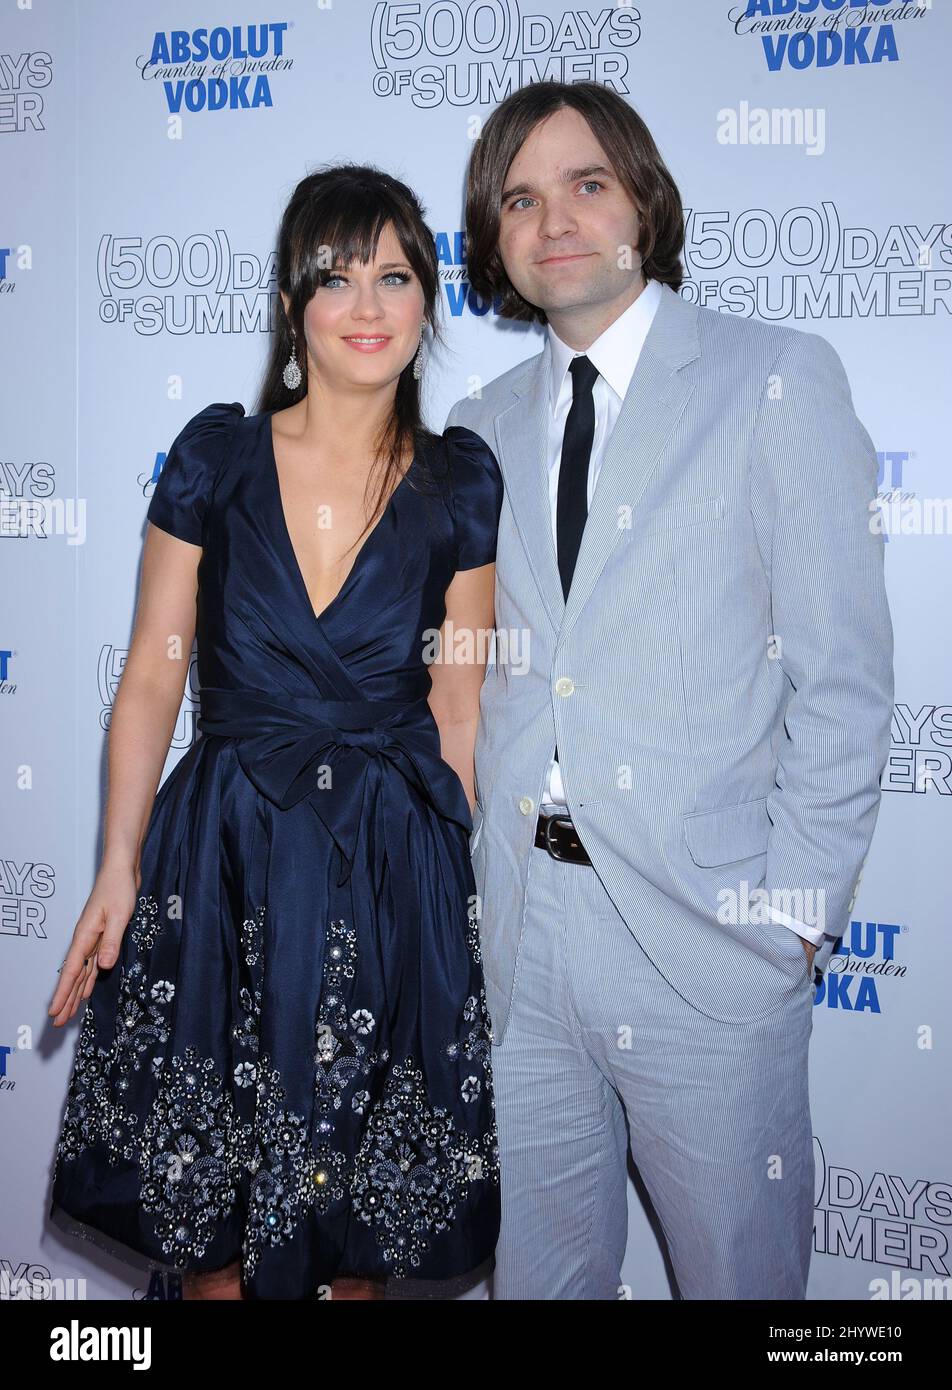 Zooey Deschanel and Ben Gibbard at the Los Angeles premiere of (500) Days of Summer at the Egyptian Theatre in Hollywood, USA. Stock Photo